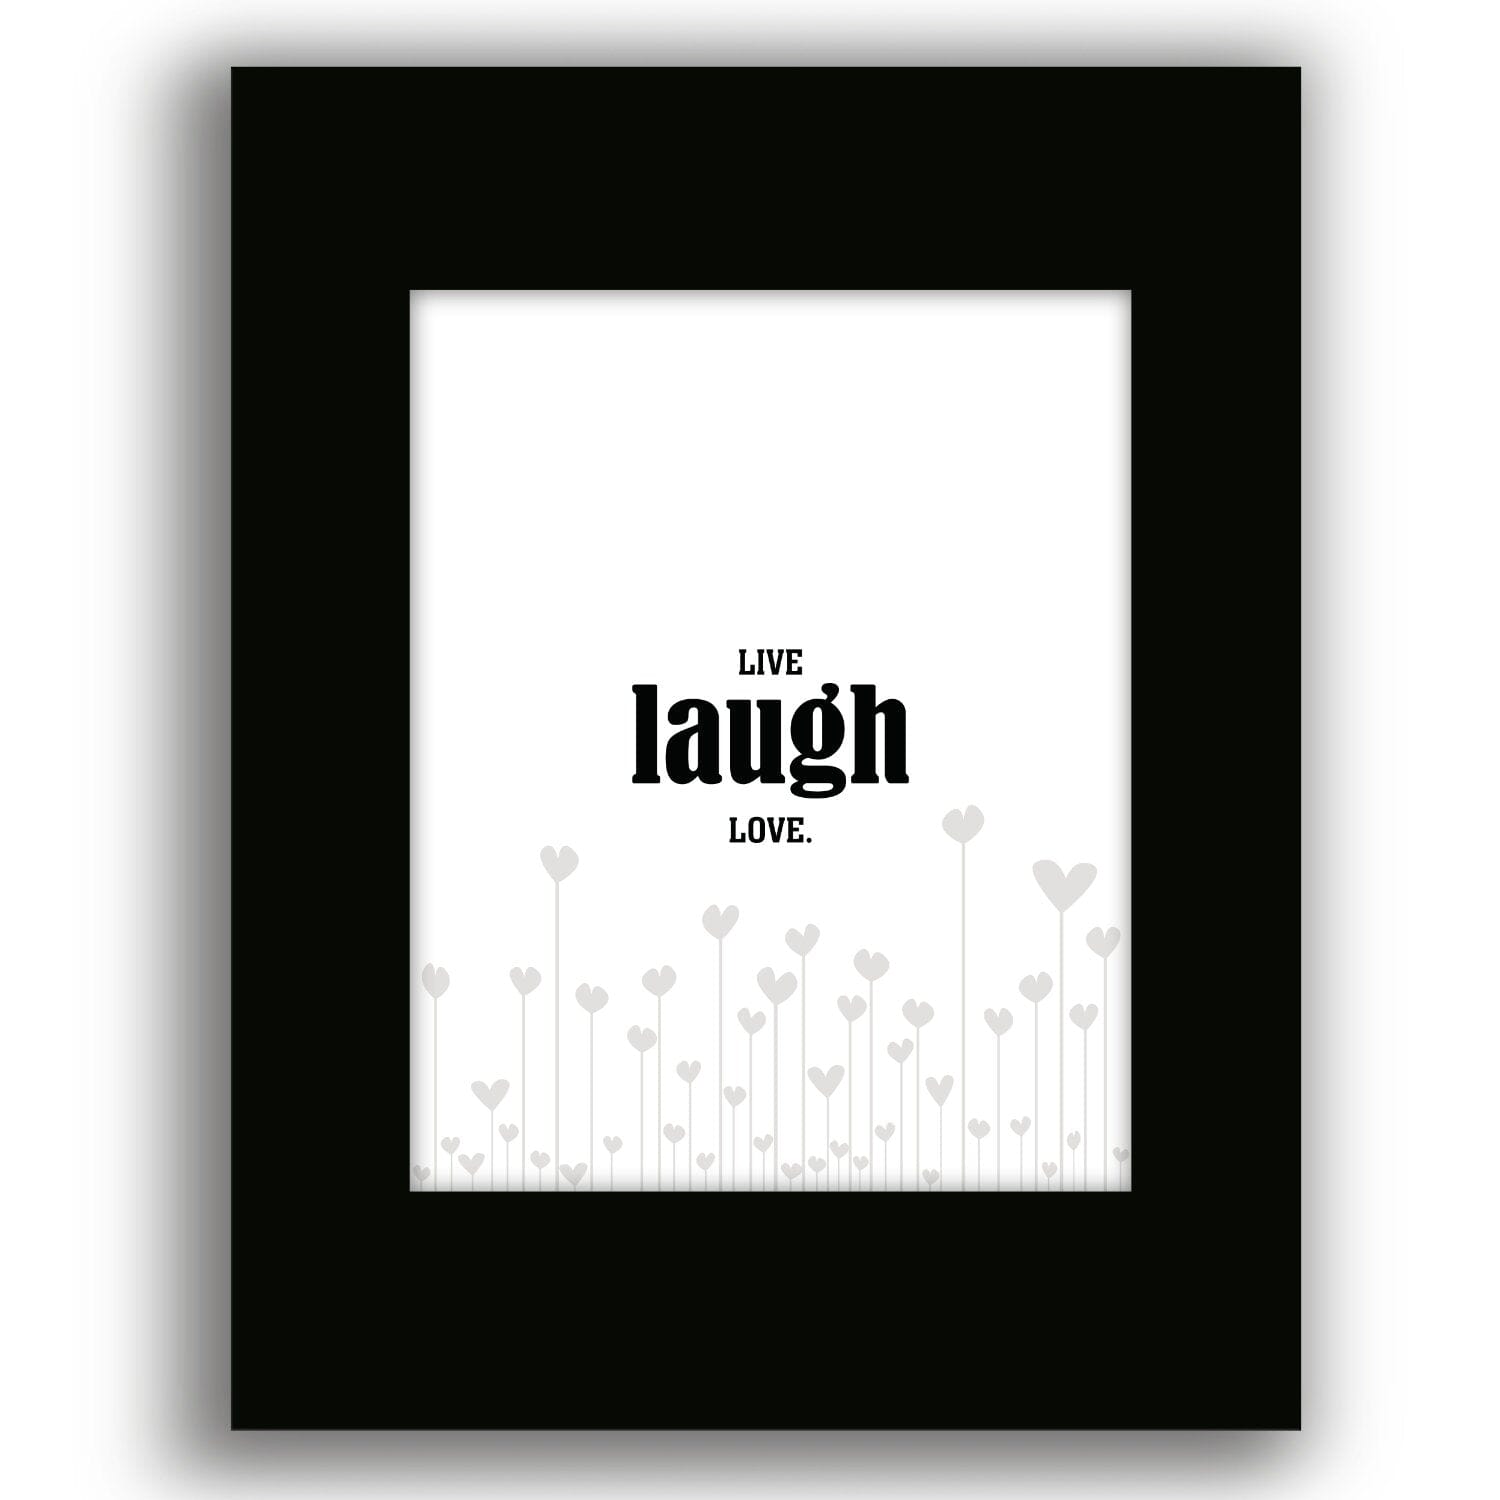 Light-Hearted Wall Art - Live Laugh Love - Wise and Witty Wise and Wiseass Quotes Song Lyrics Art 8x10 Black Matted Print 